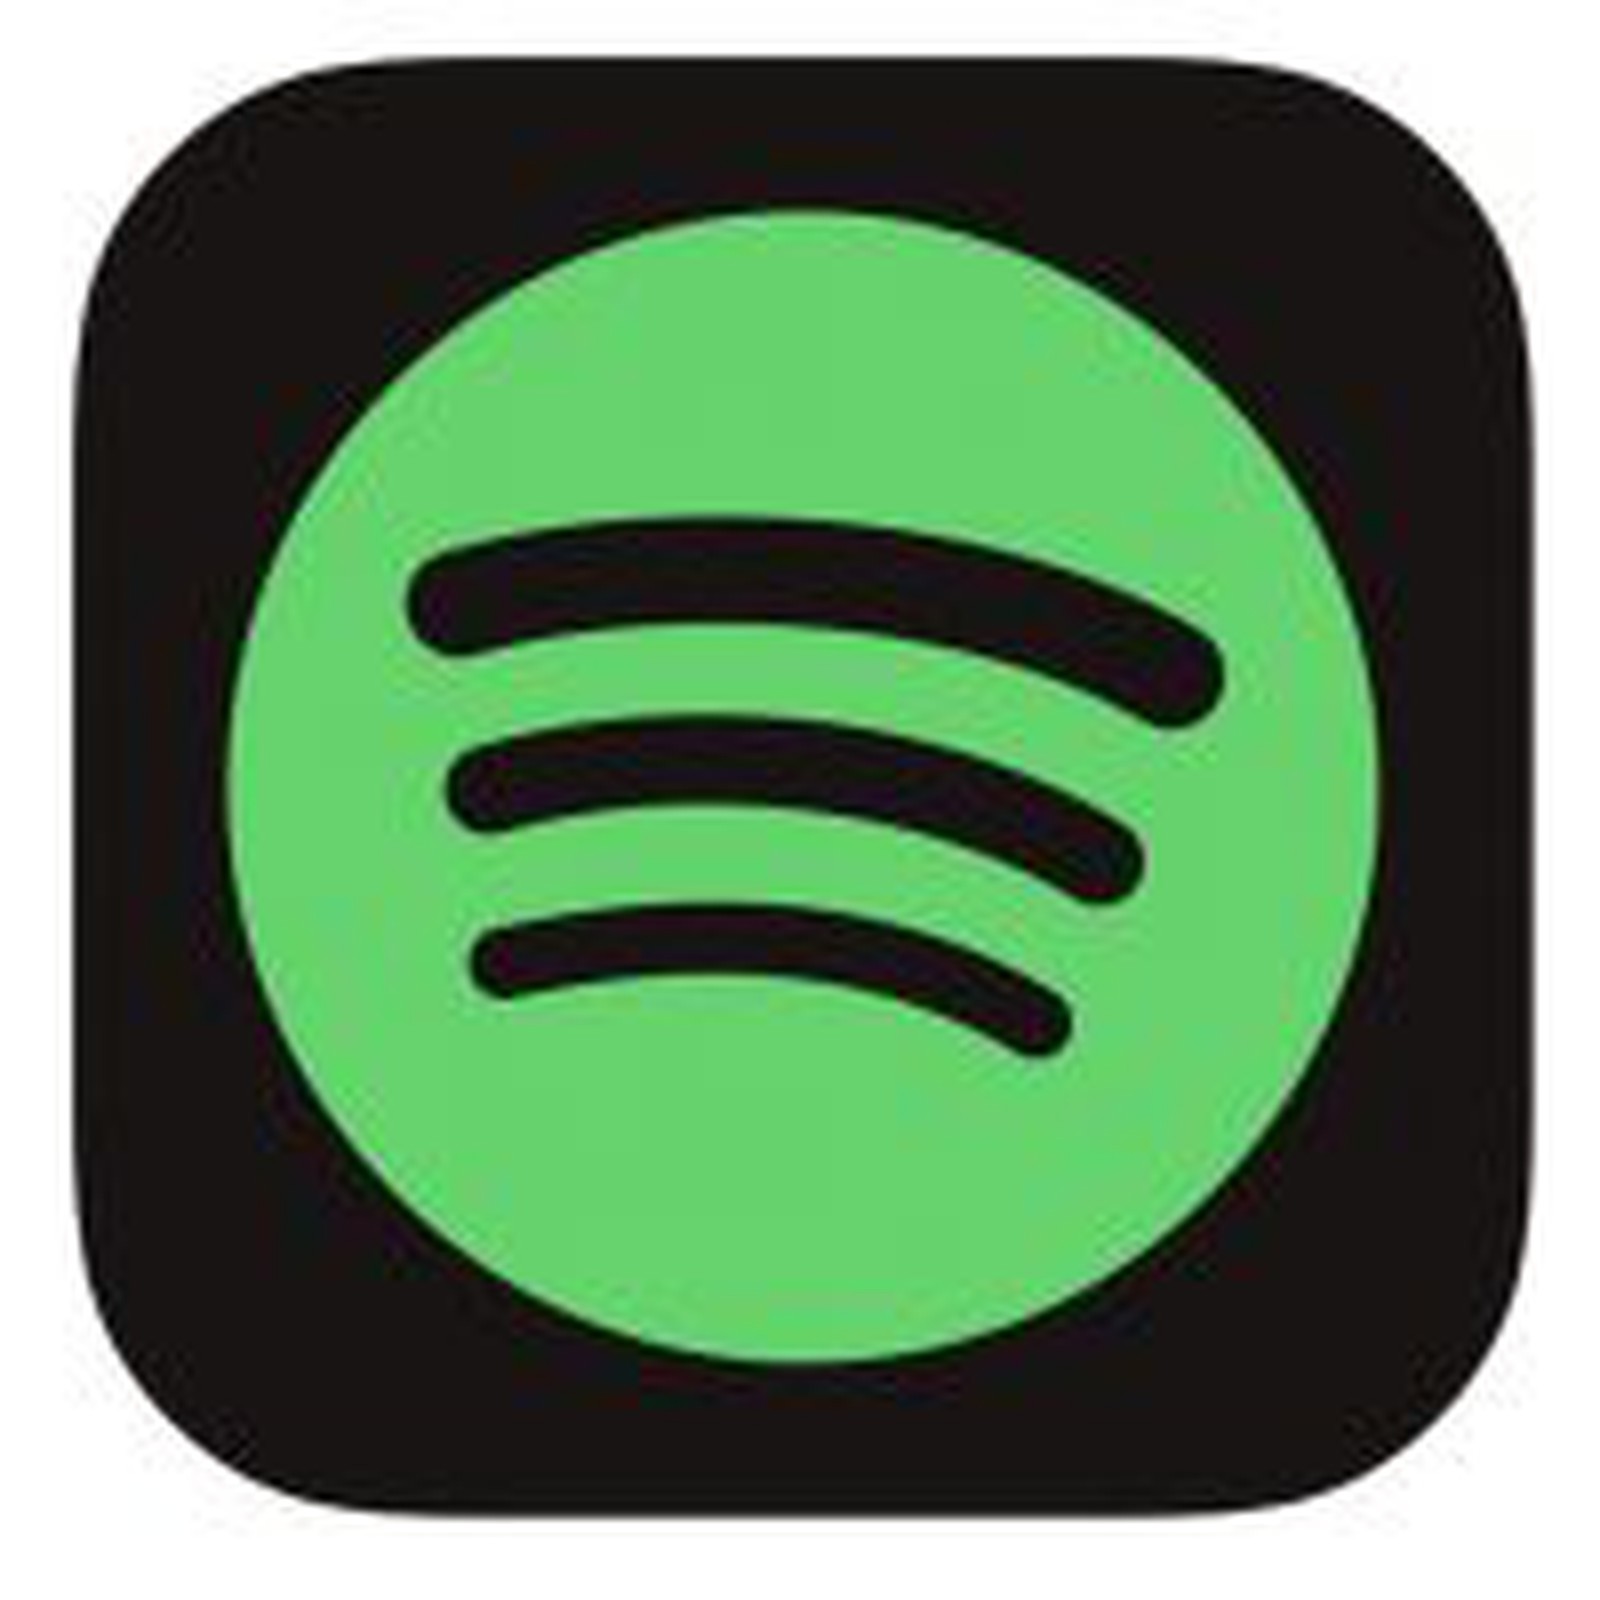 is the spotify app free